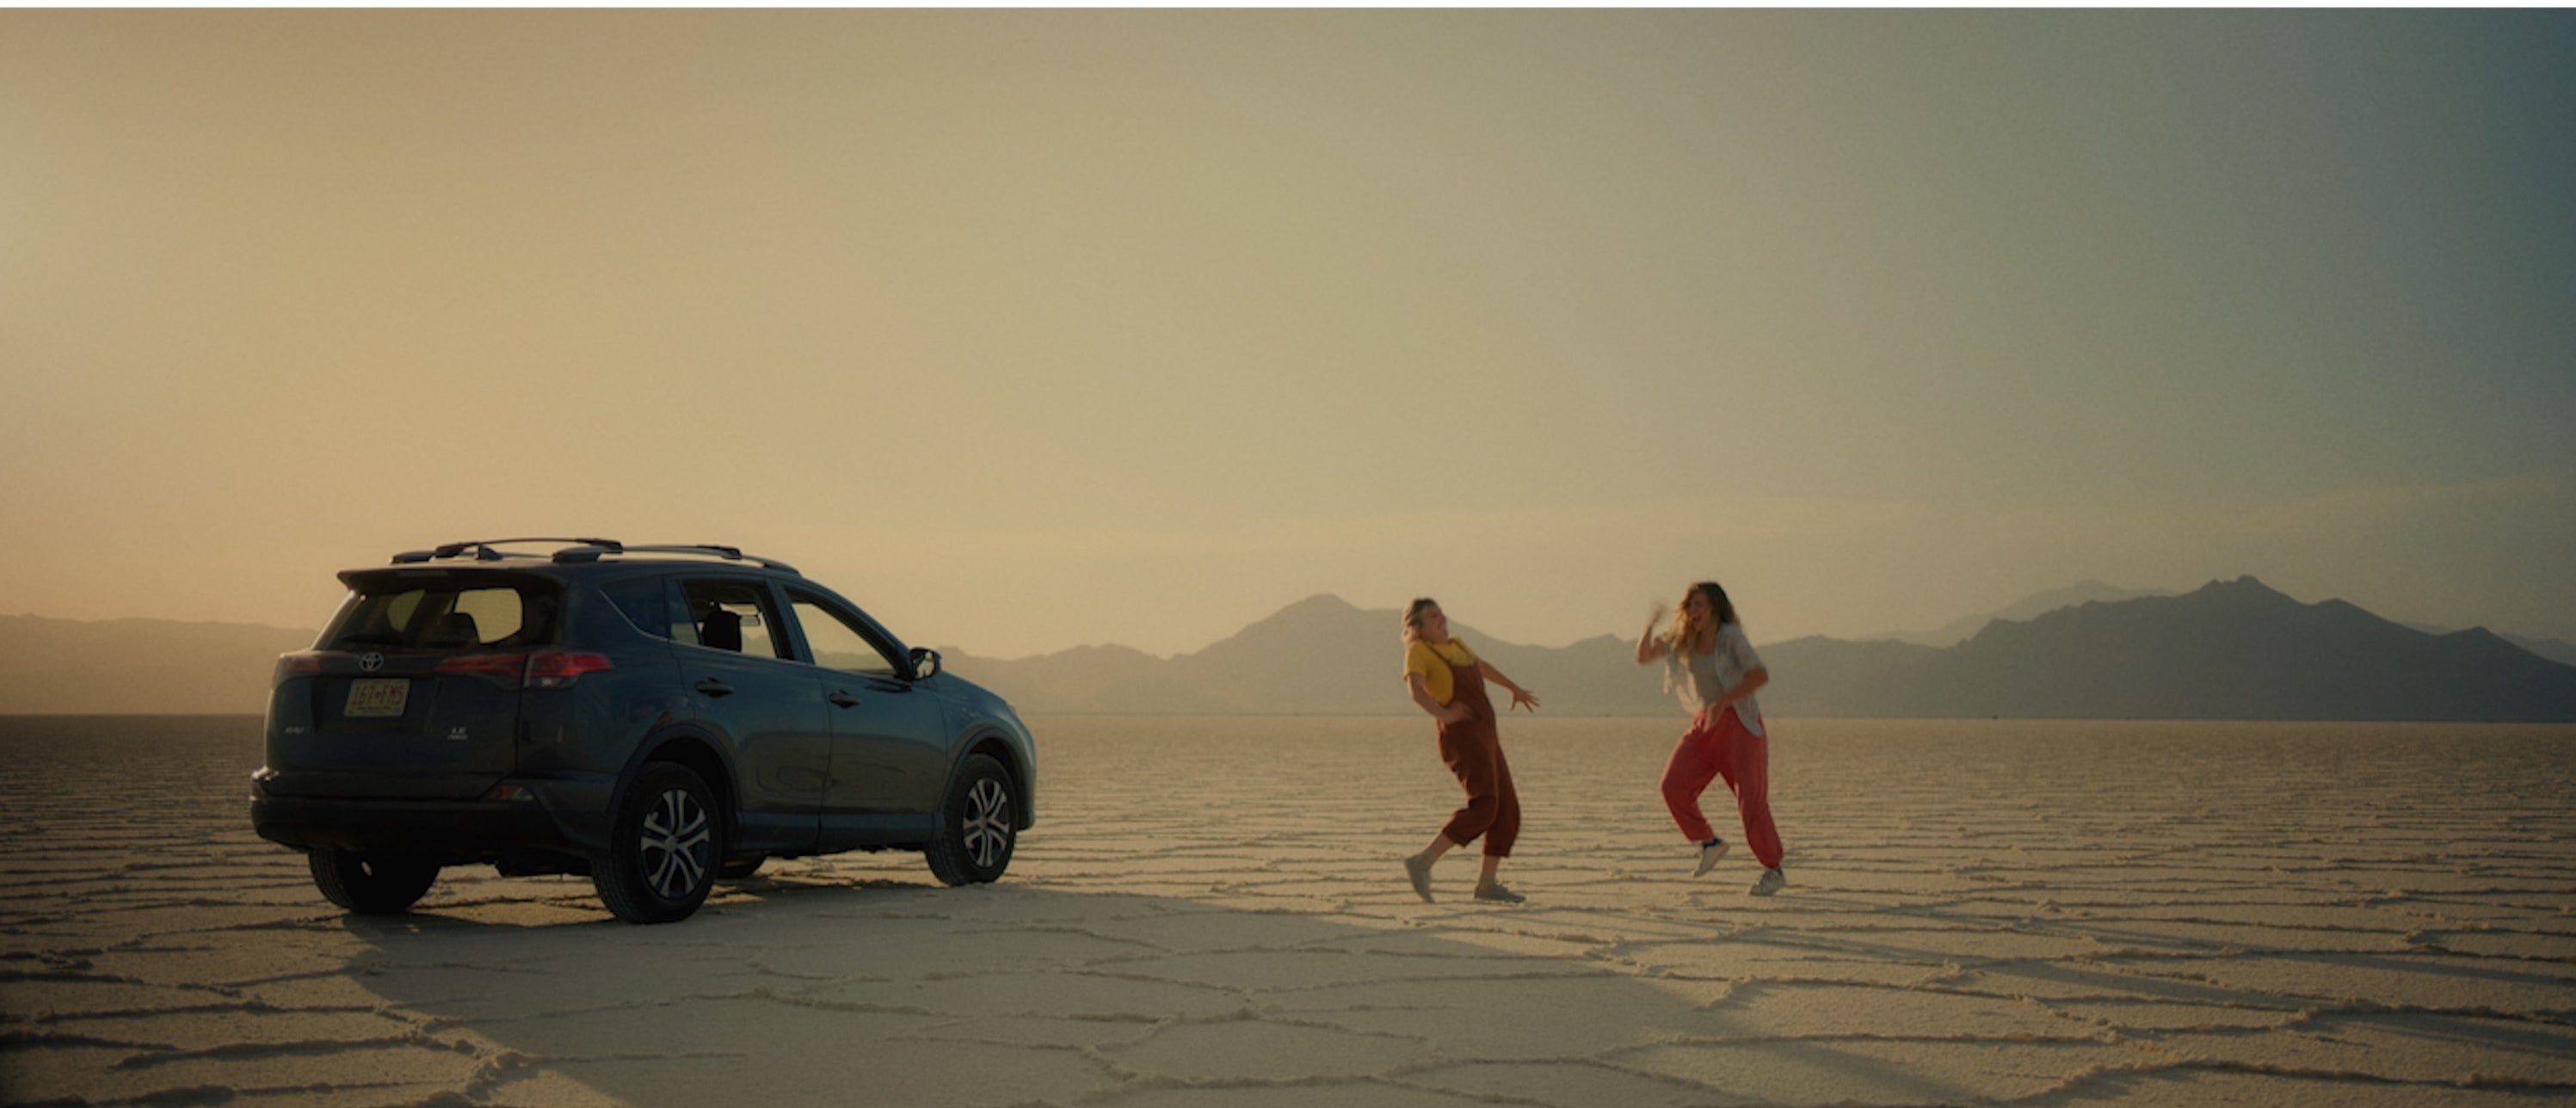 The sisters dancing in the middle of the desert next to a car